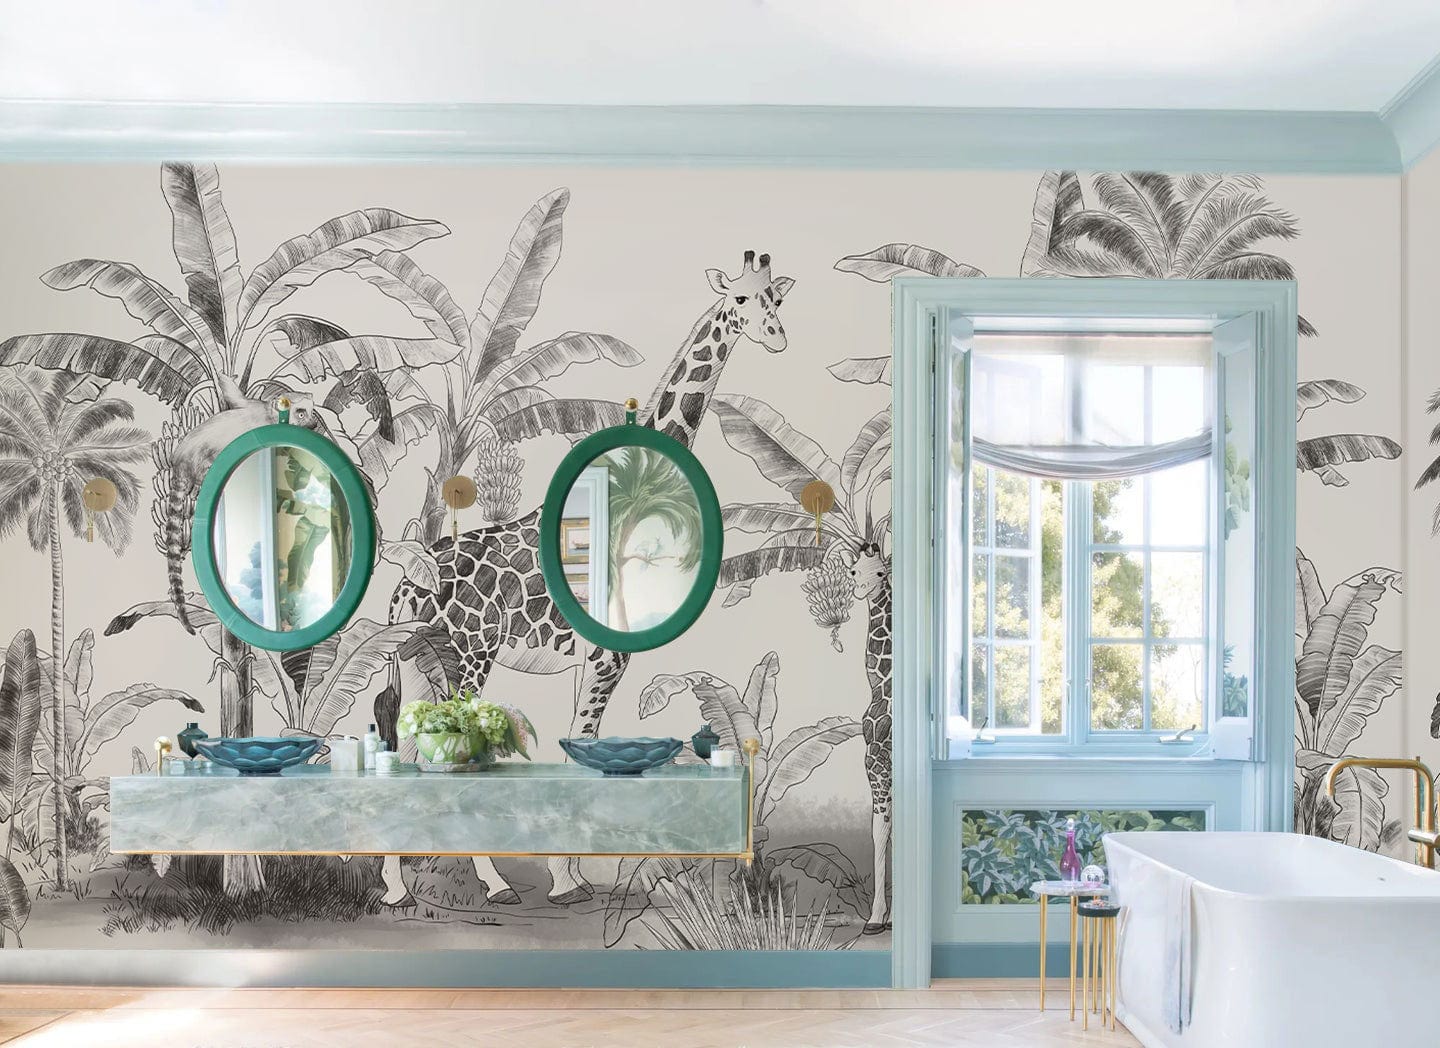 A Mural of a Tropical Animal Sketch Printed on Wallpaper Used as a Wall Decoration in the Bathroom